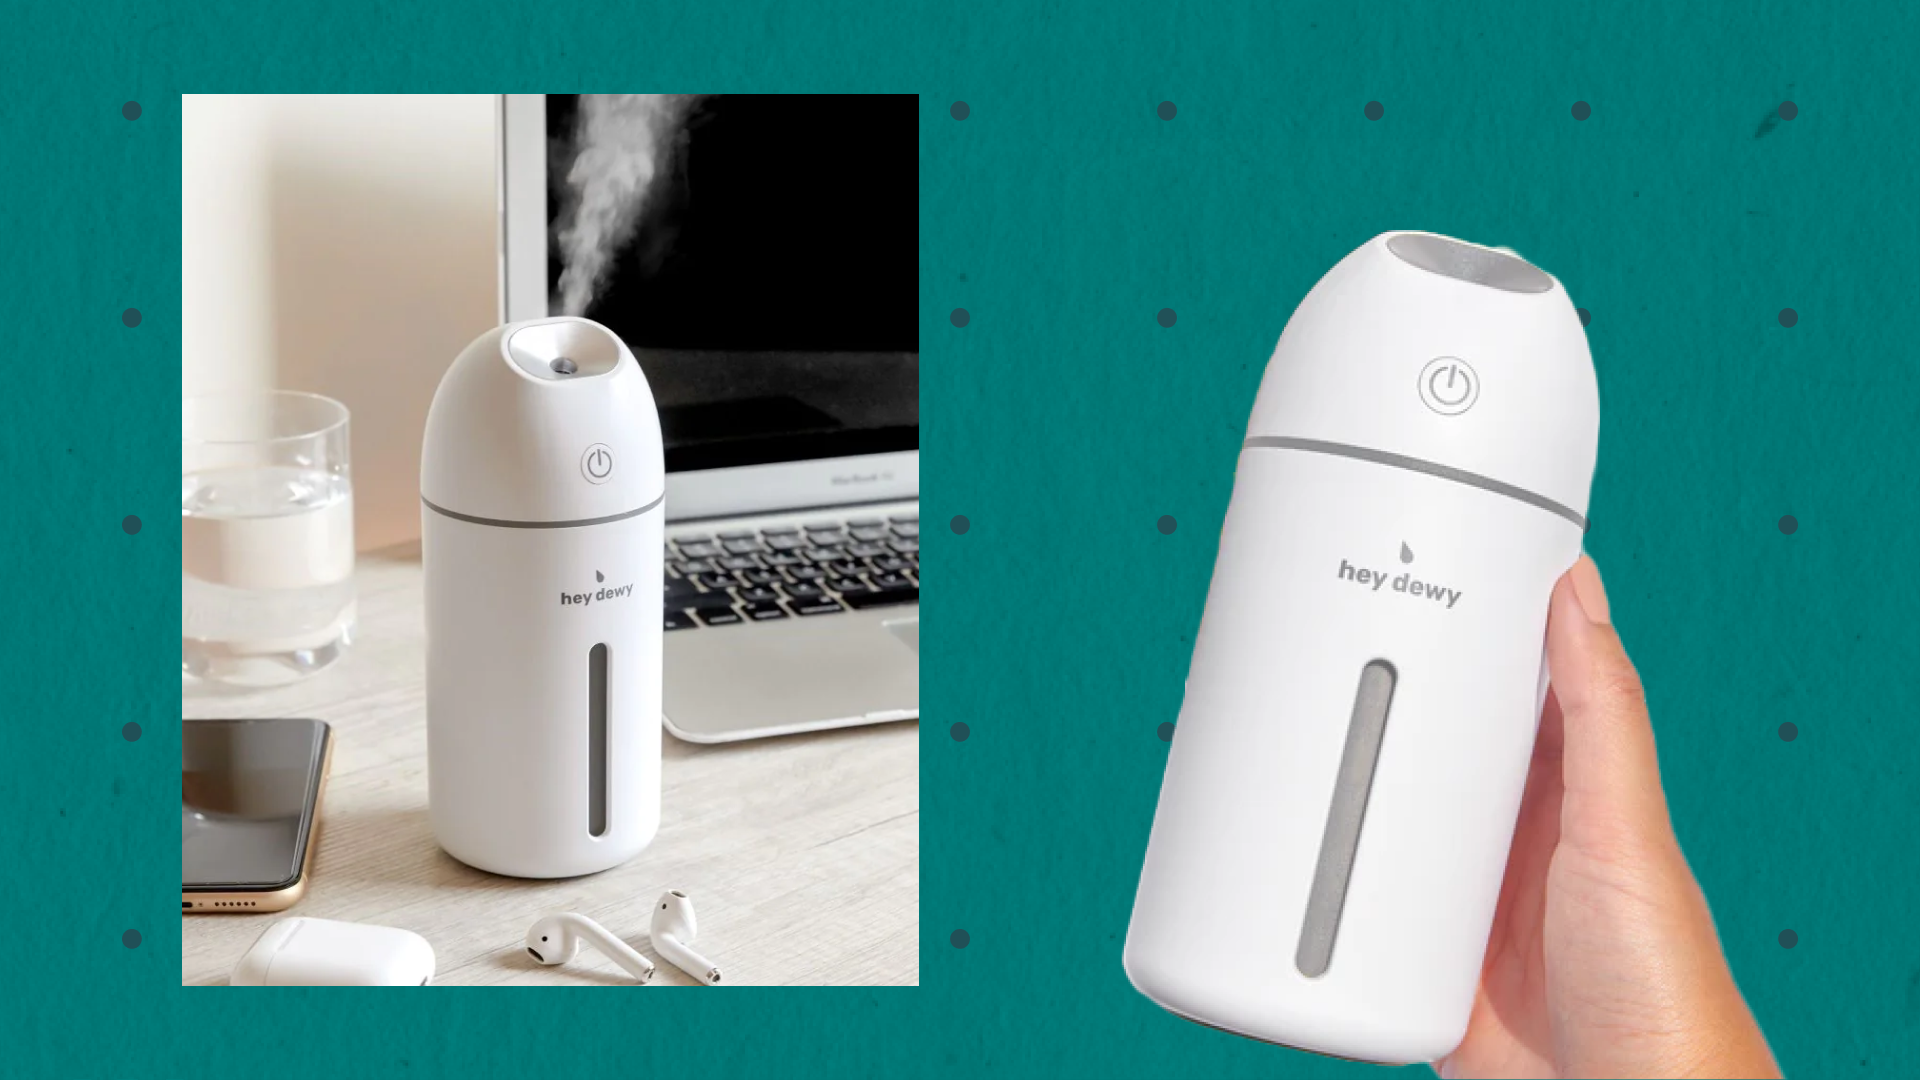 White Hey Dewy portable humidifier on a desk next to a laptop on left, being held in a hand on right